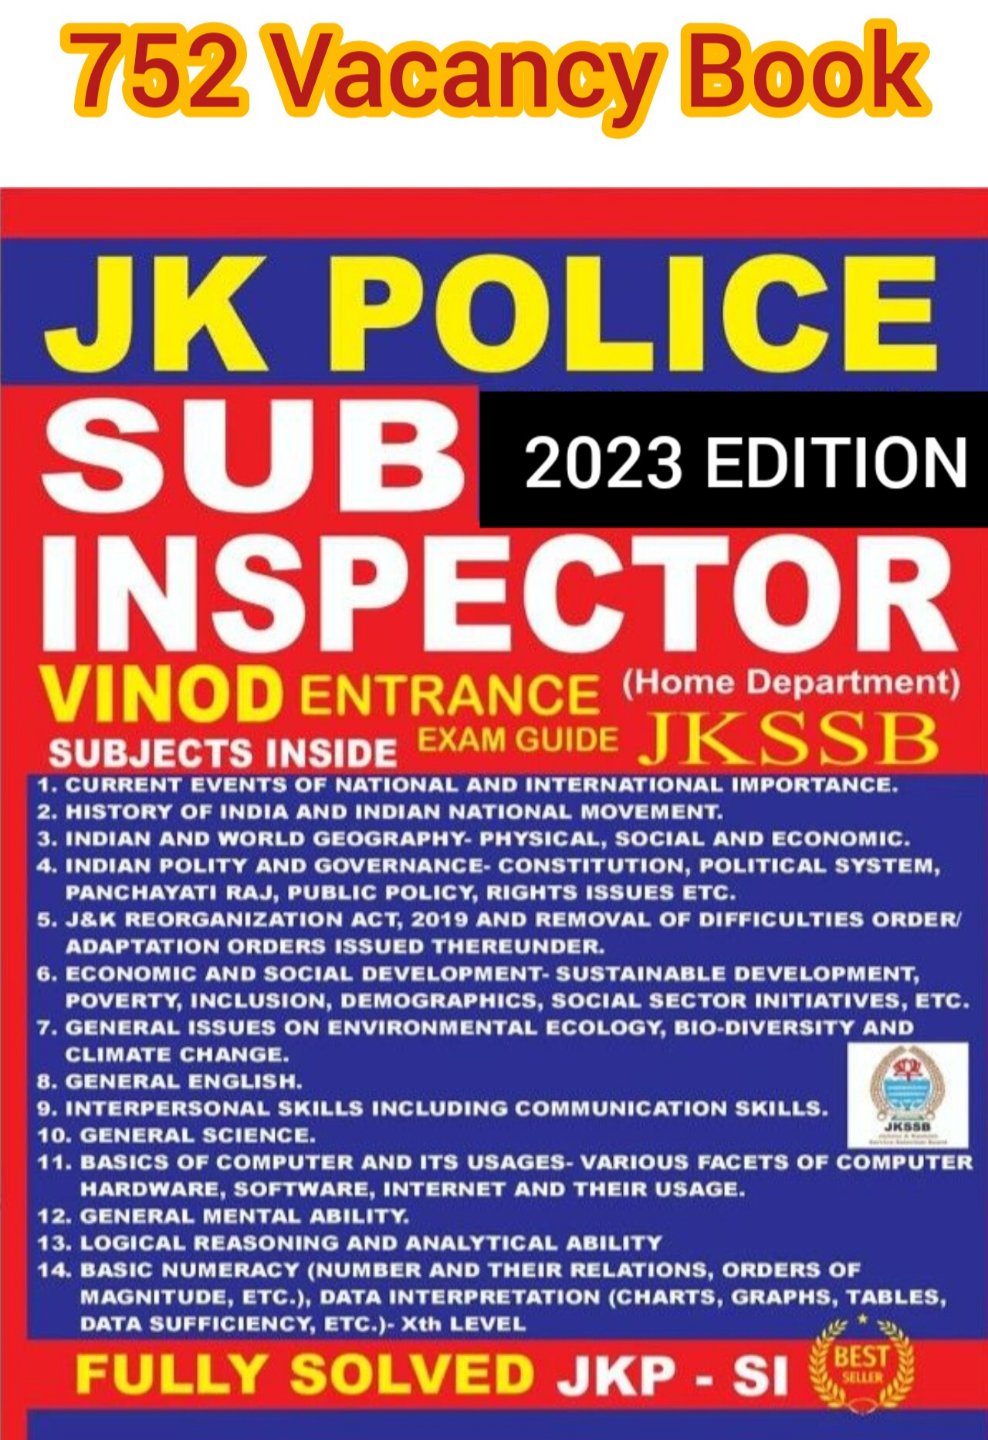 Vinod JKP SI (2023 Edition) Jk POLICE SUB INSPECTOR (Home Department) ; VINOD PUBLICATIONS ; CALL 9218219218 - Dr. M.M. Aggarwal